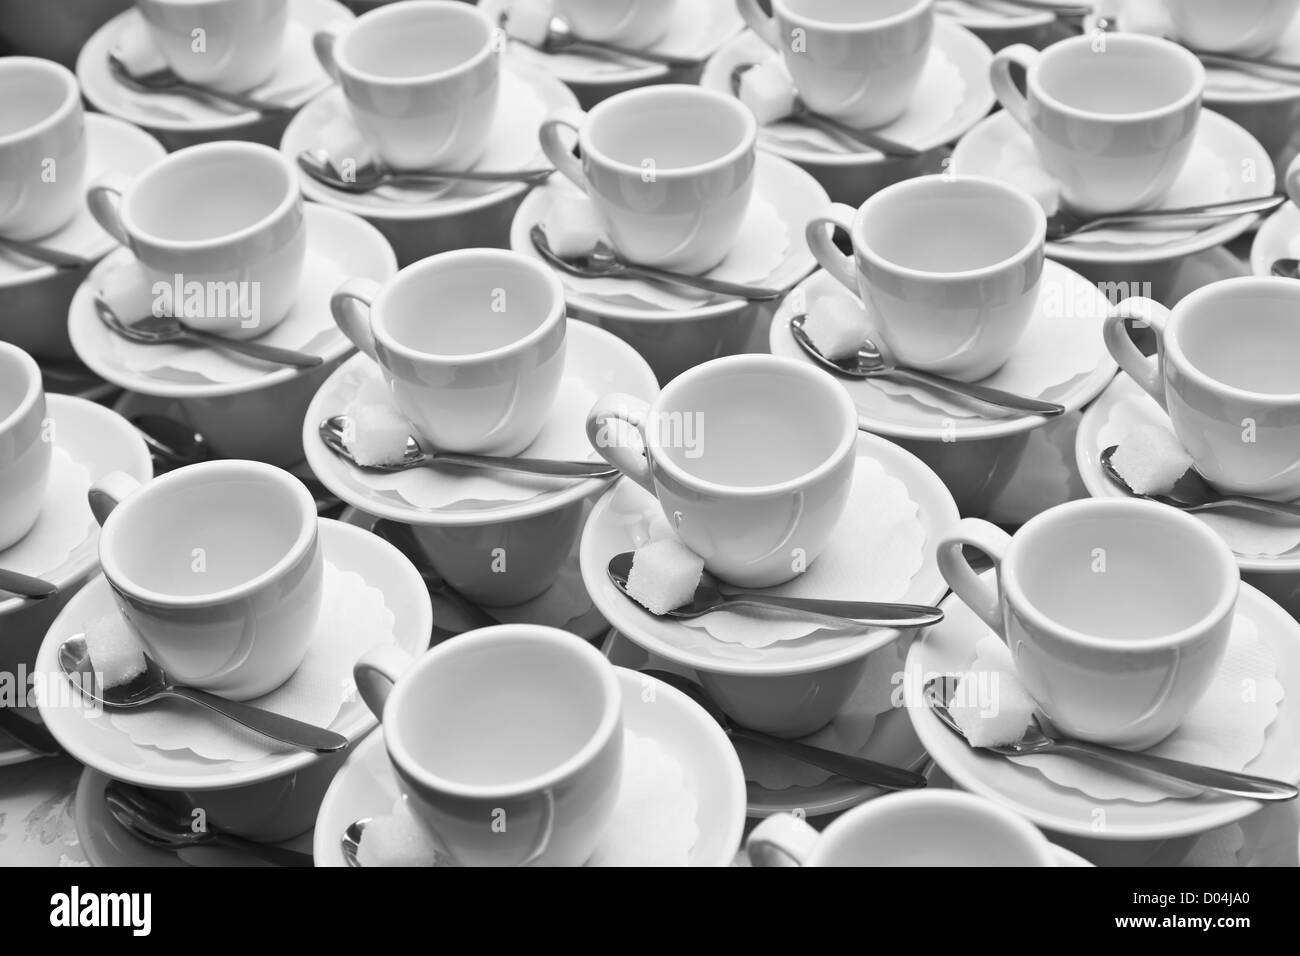 Tablewares prepared for the large tea party Shallow depth of field Stock Photo